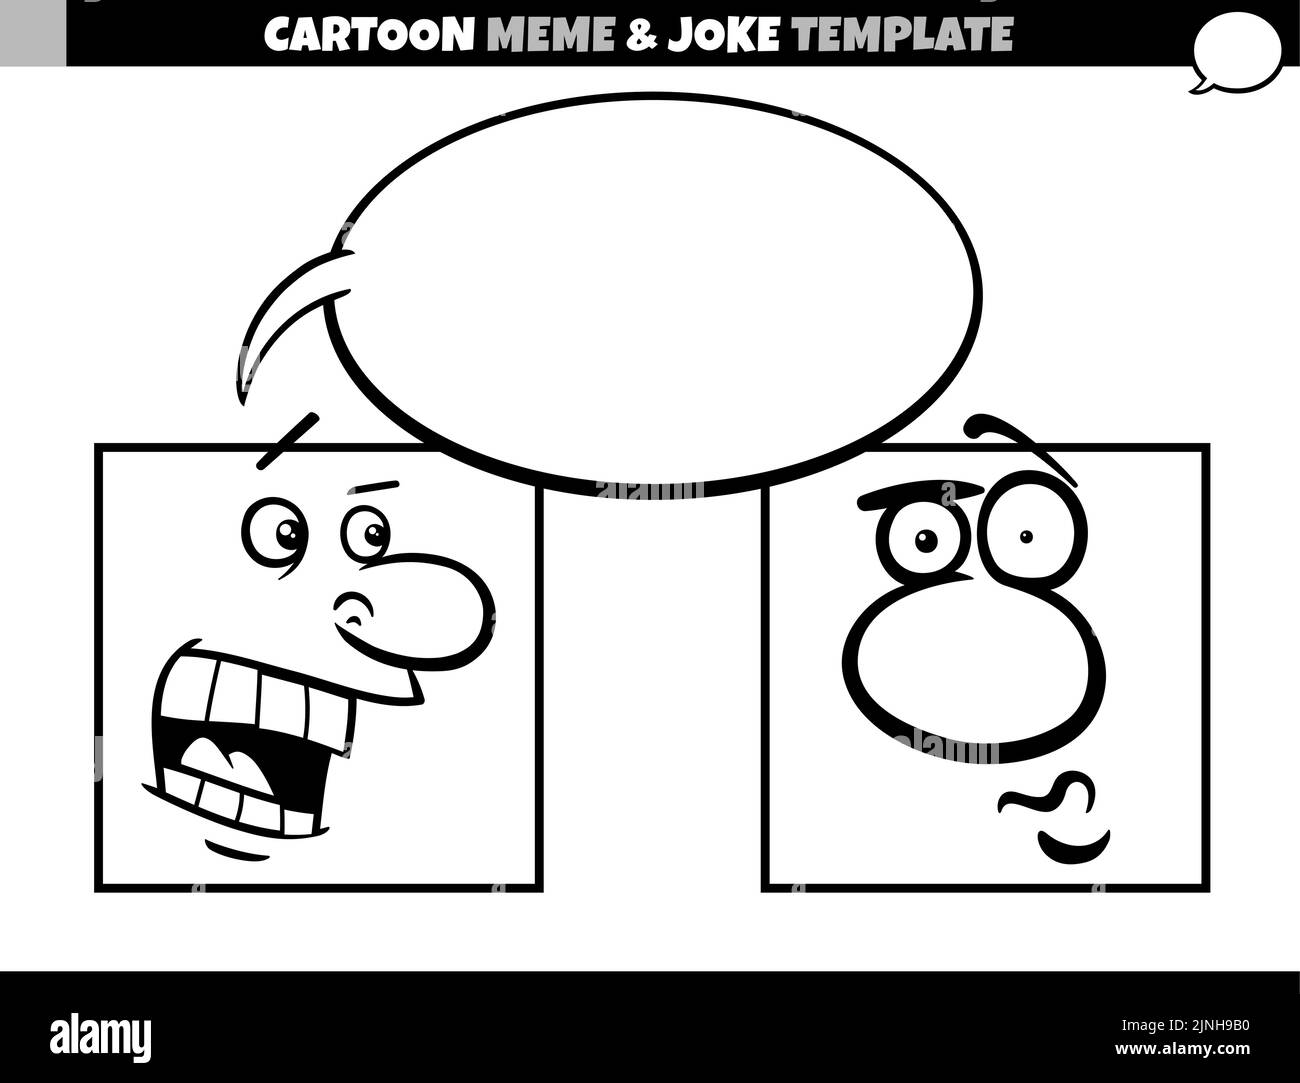 Meme template Black and White Stock Photos & Images - Alamy